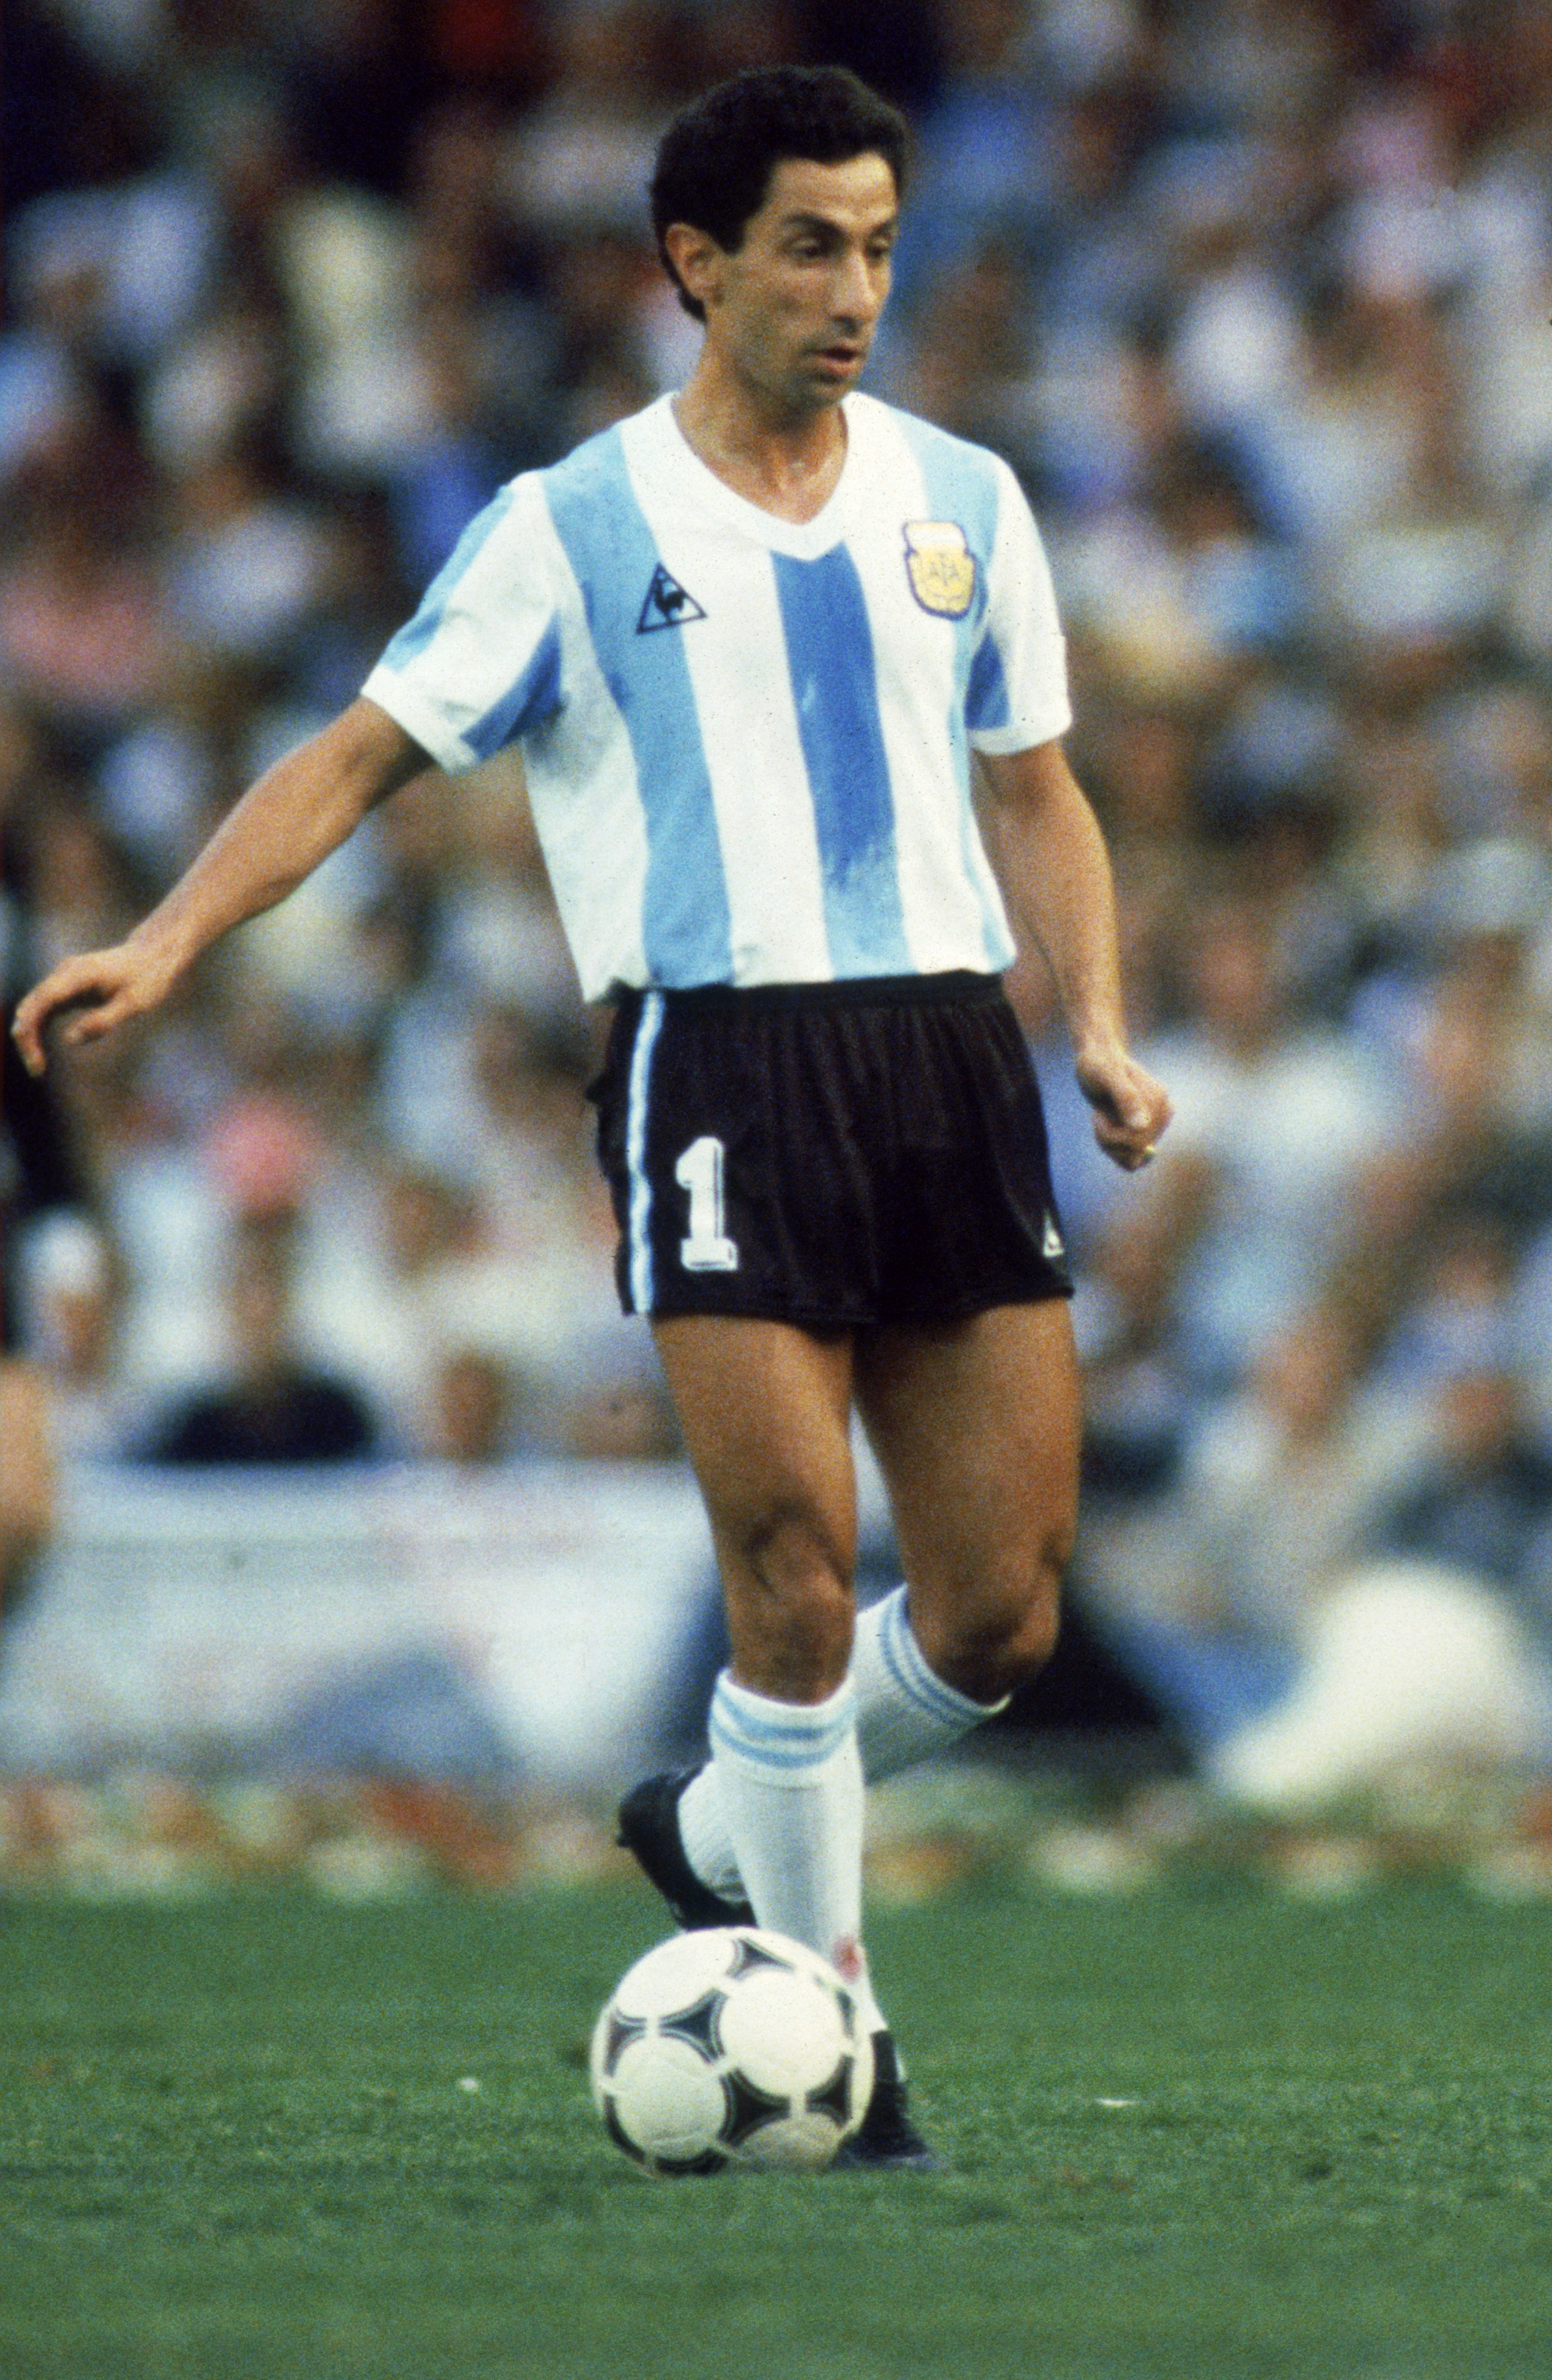 BARCELONA - JUNE 13:  Ossie Ardiles of Argentina runs with the ball during the FIFA World Cup Finals 1982 Group C match between Argentina and Belgium held on June 13, 1982 at the Nou Camp, in Barcelona, Spain. Belgium won the match 1-0. (Photo by Steve Po